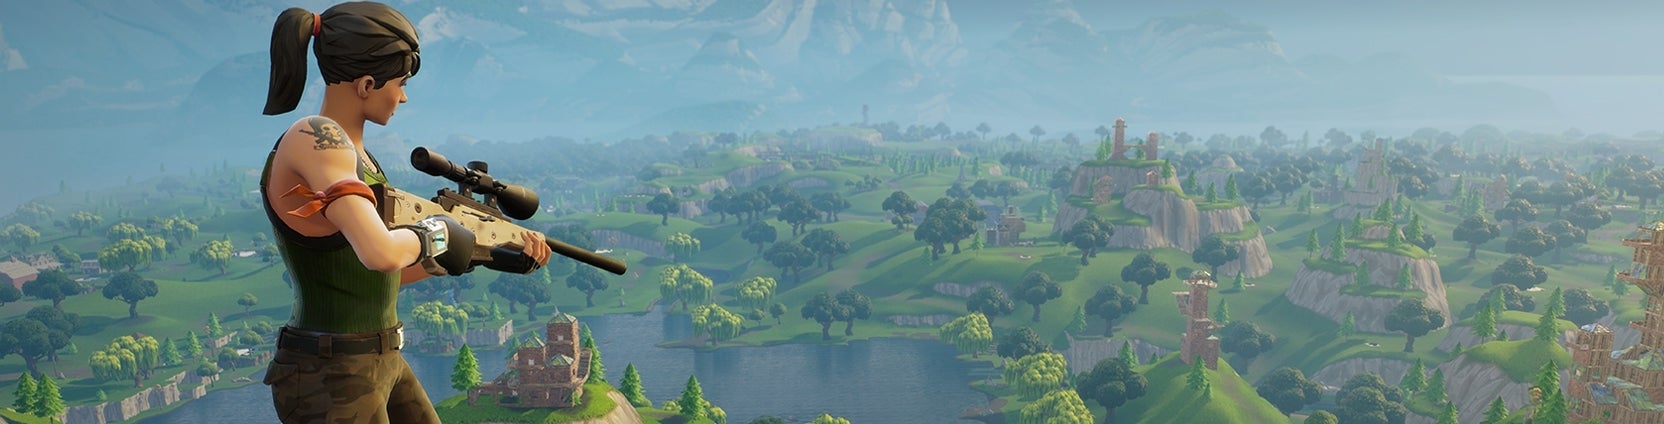 Image for Fortnite's new 60fps mode is the real deal